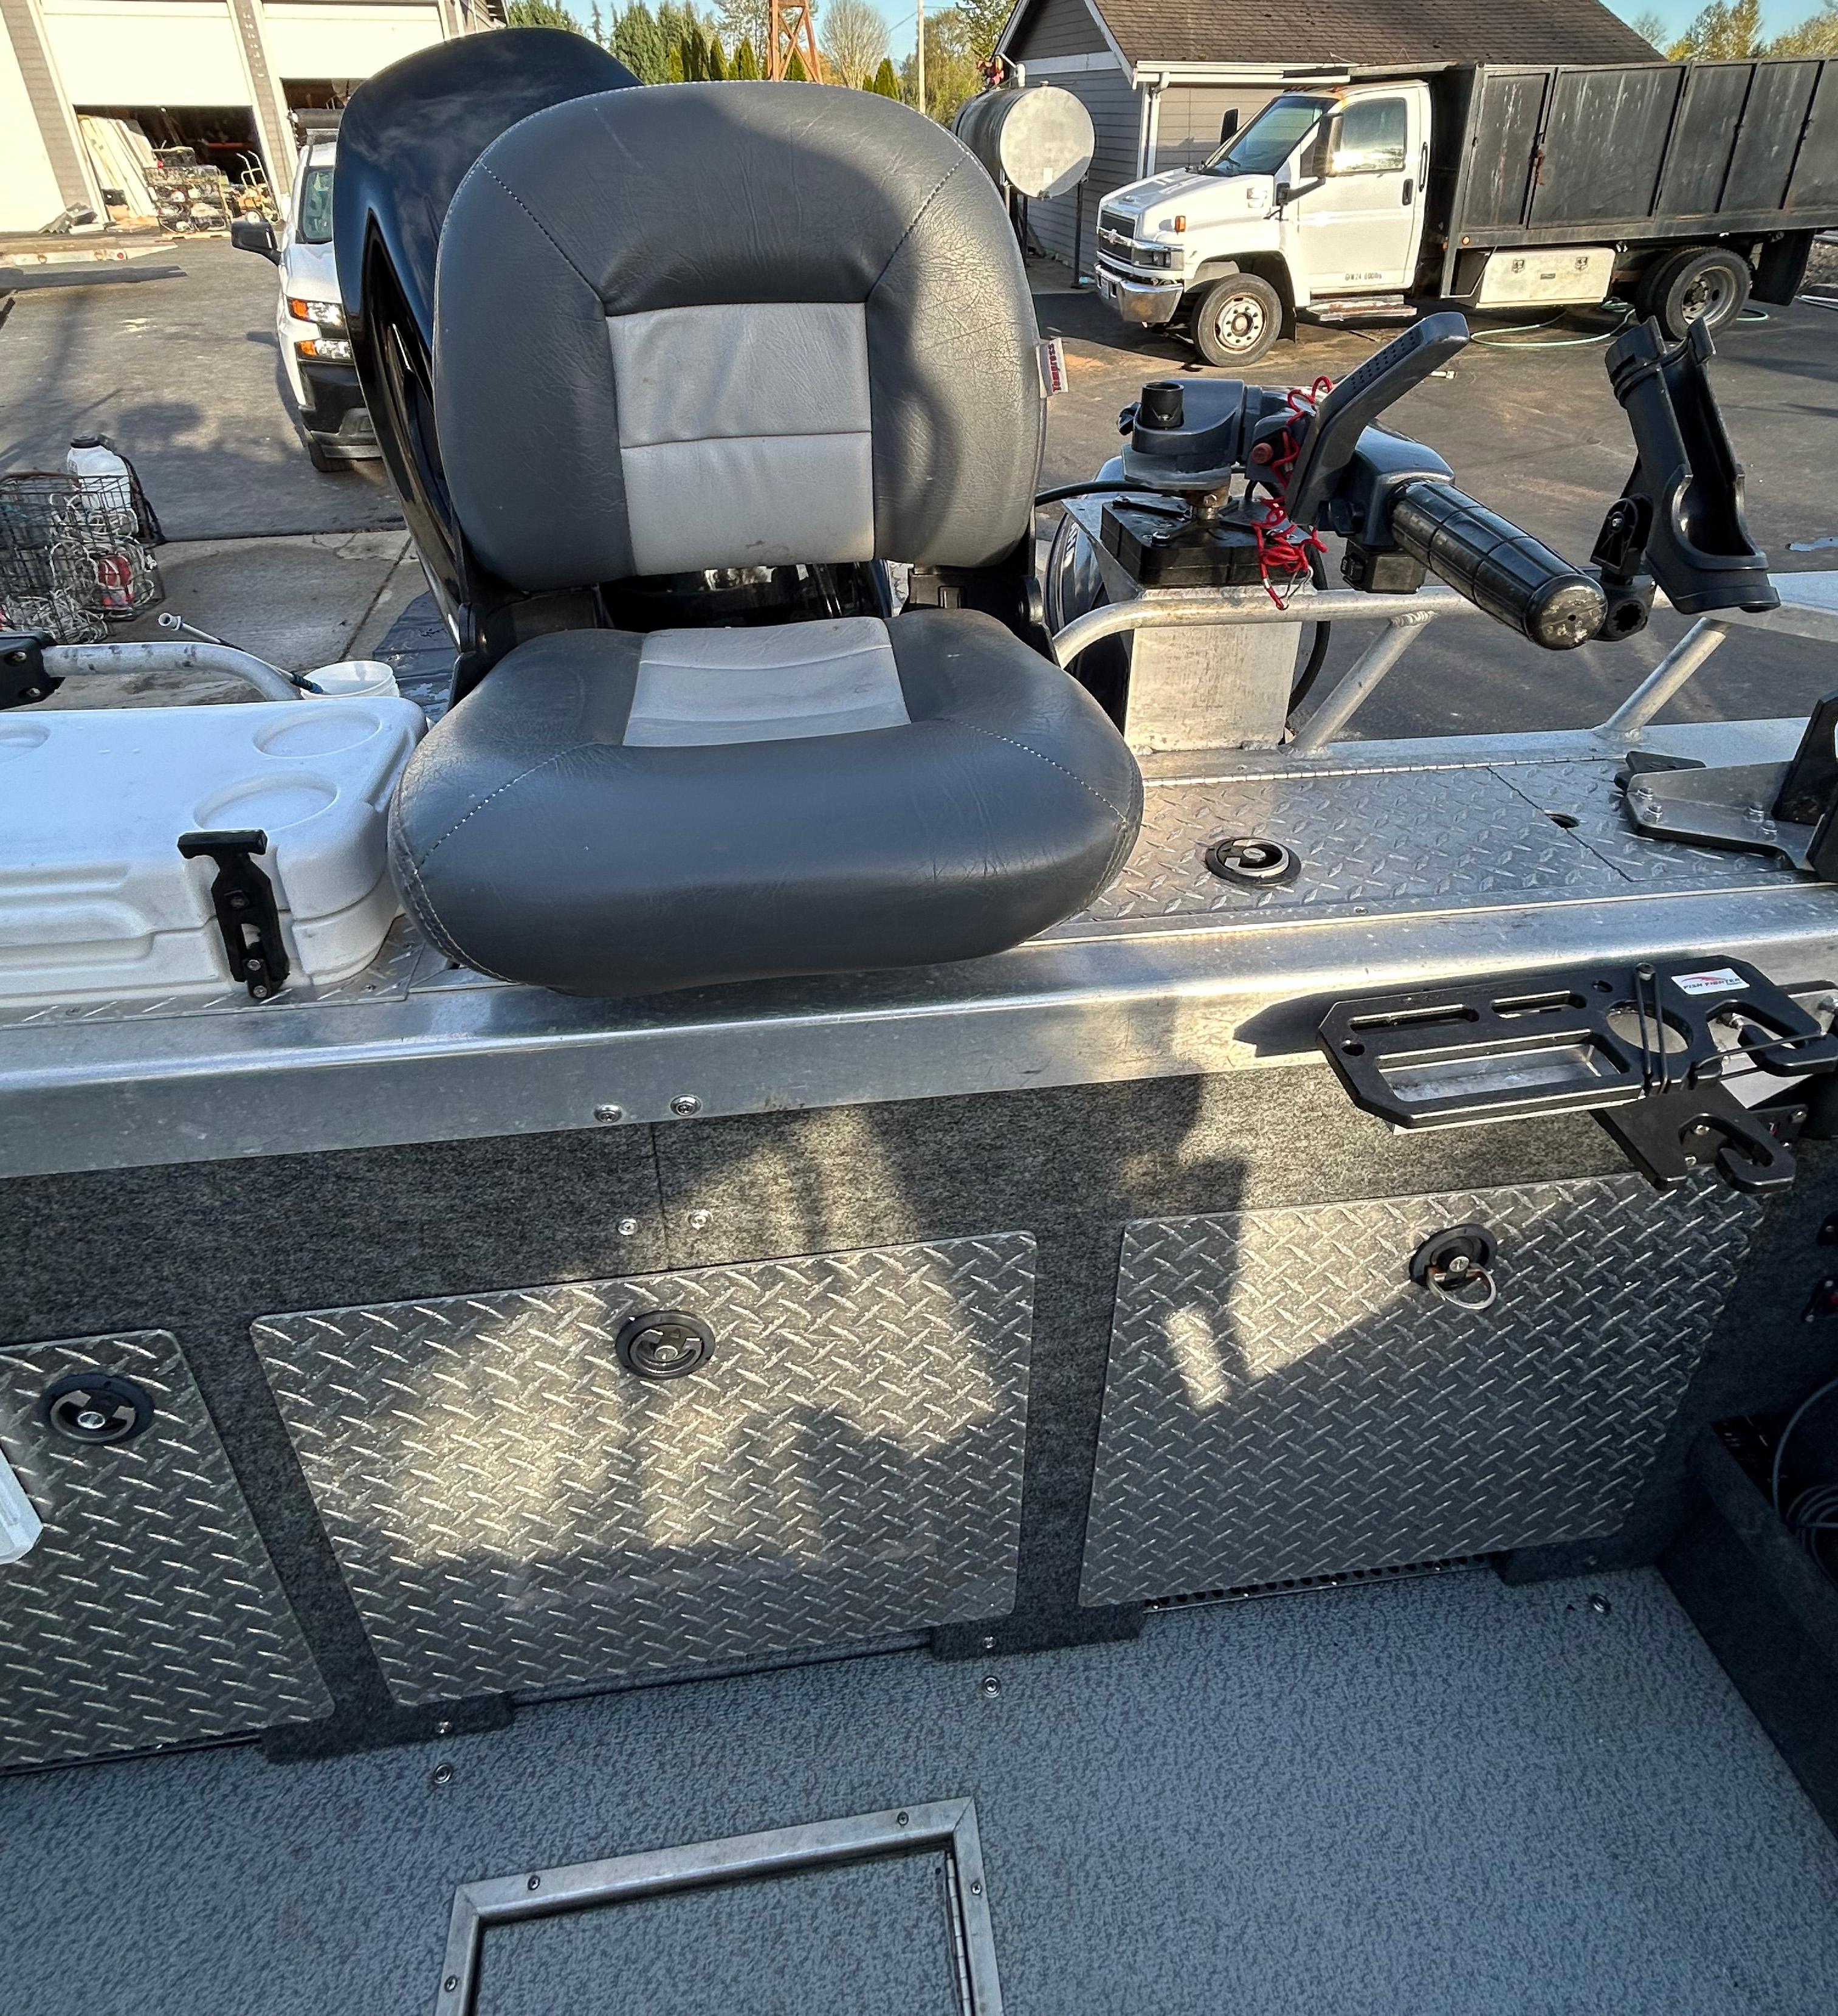 2008 Thunder Jet Luxor Outboard Offshore